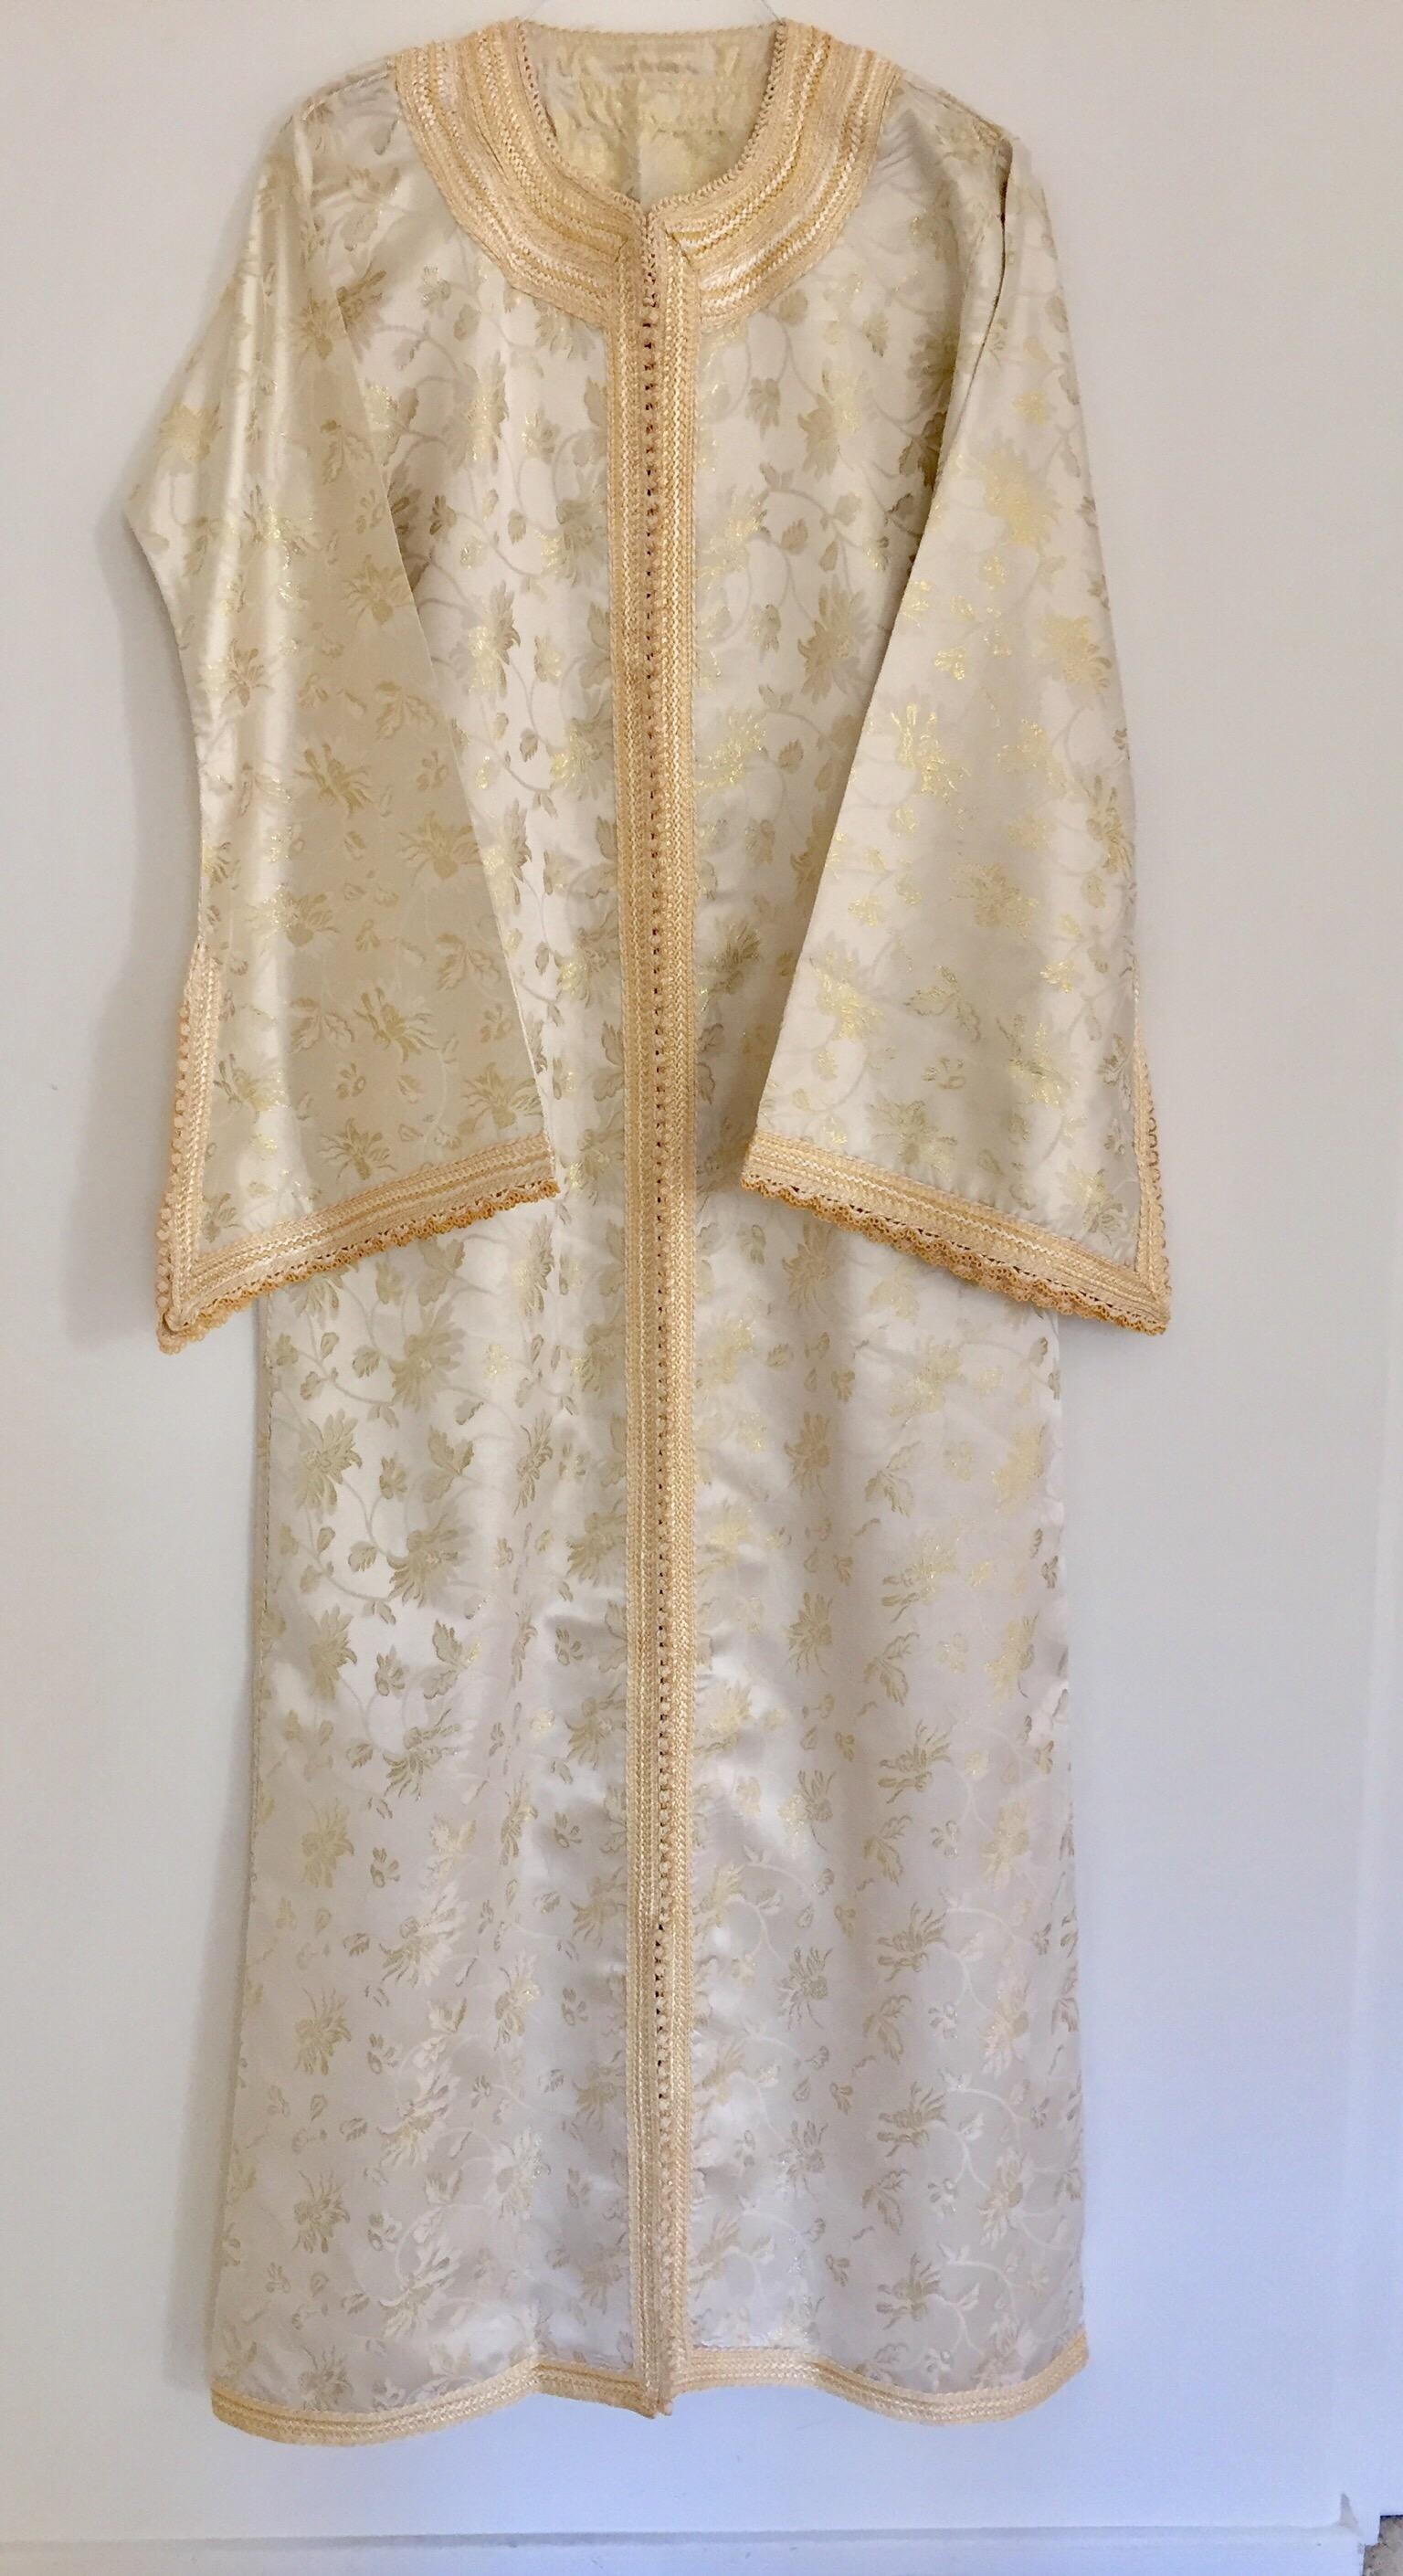 Vintage Moroccan Kaftan White and Gold Metallic Floral Brocade Caftan 1970's For Sale 7